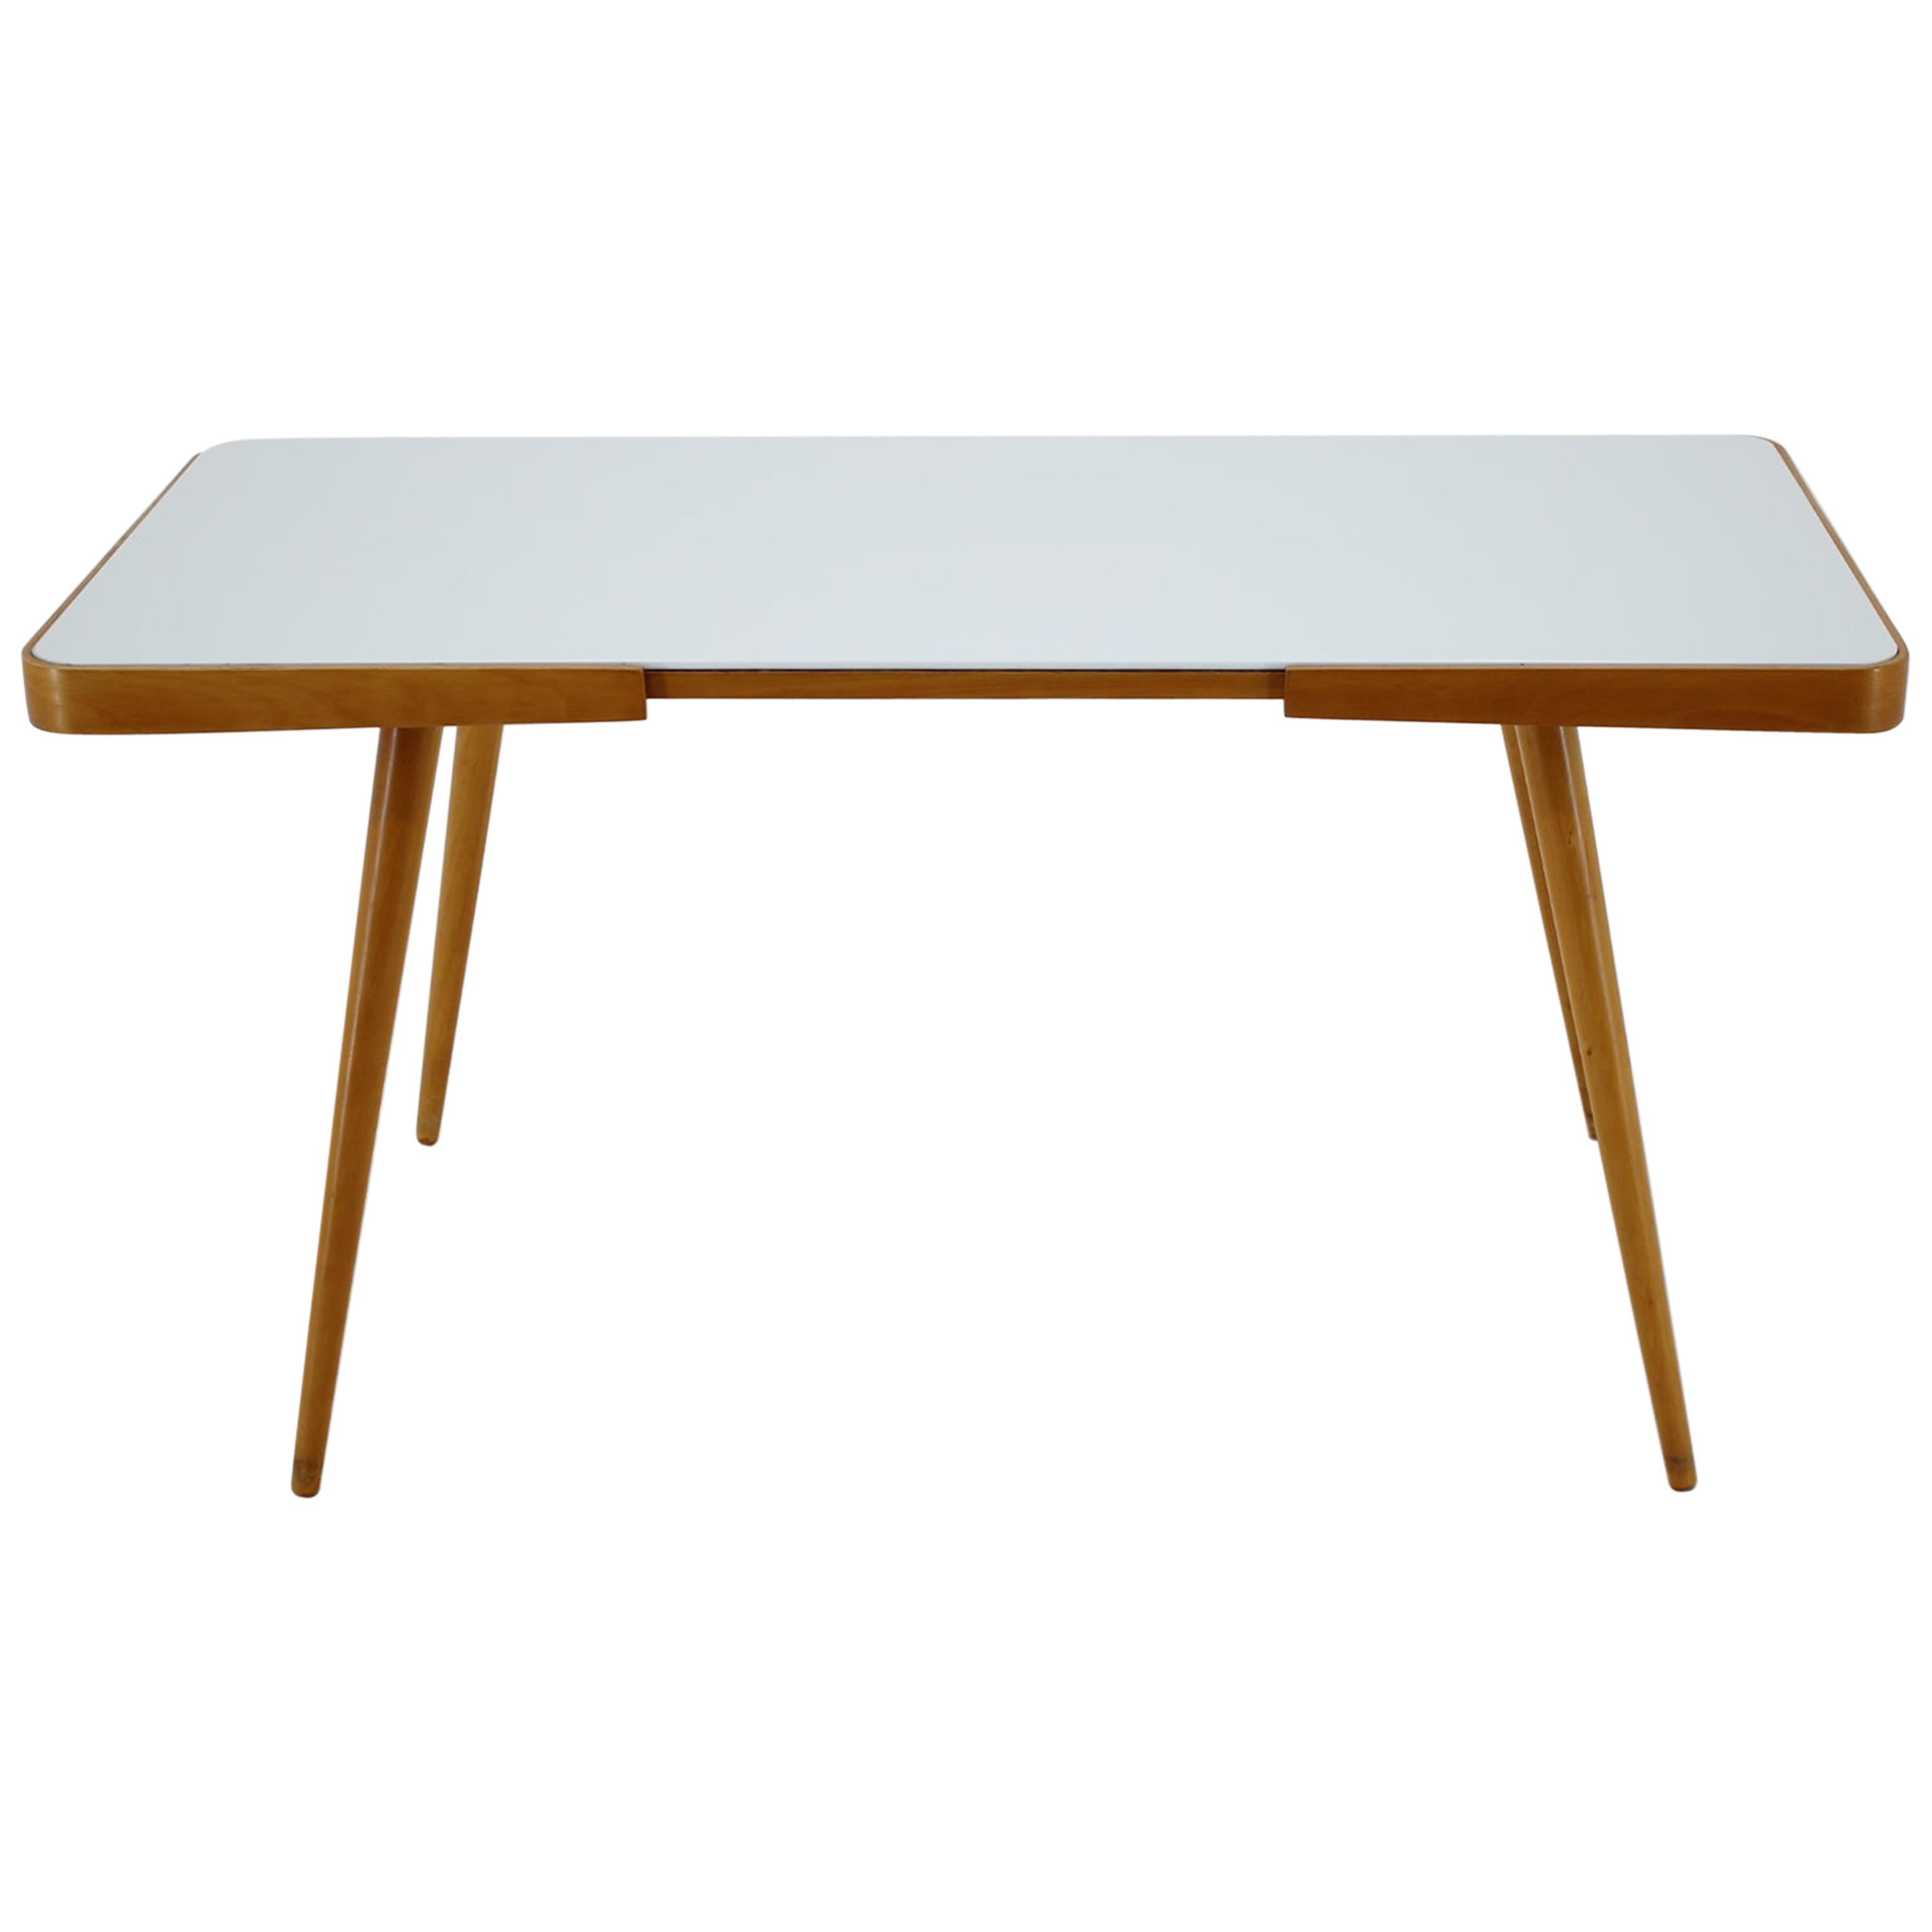 Midcentury Coffee Table Designed by Mirosval Navrátil, 1960s